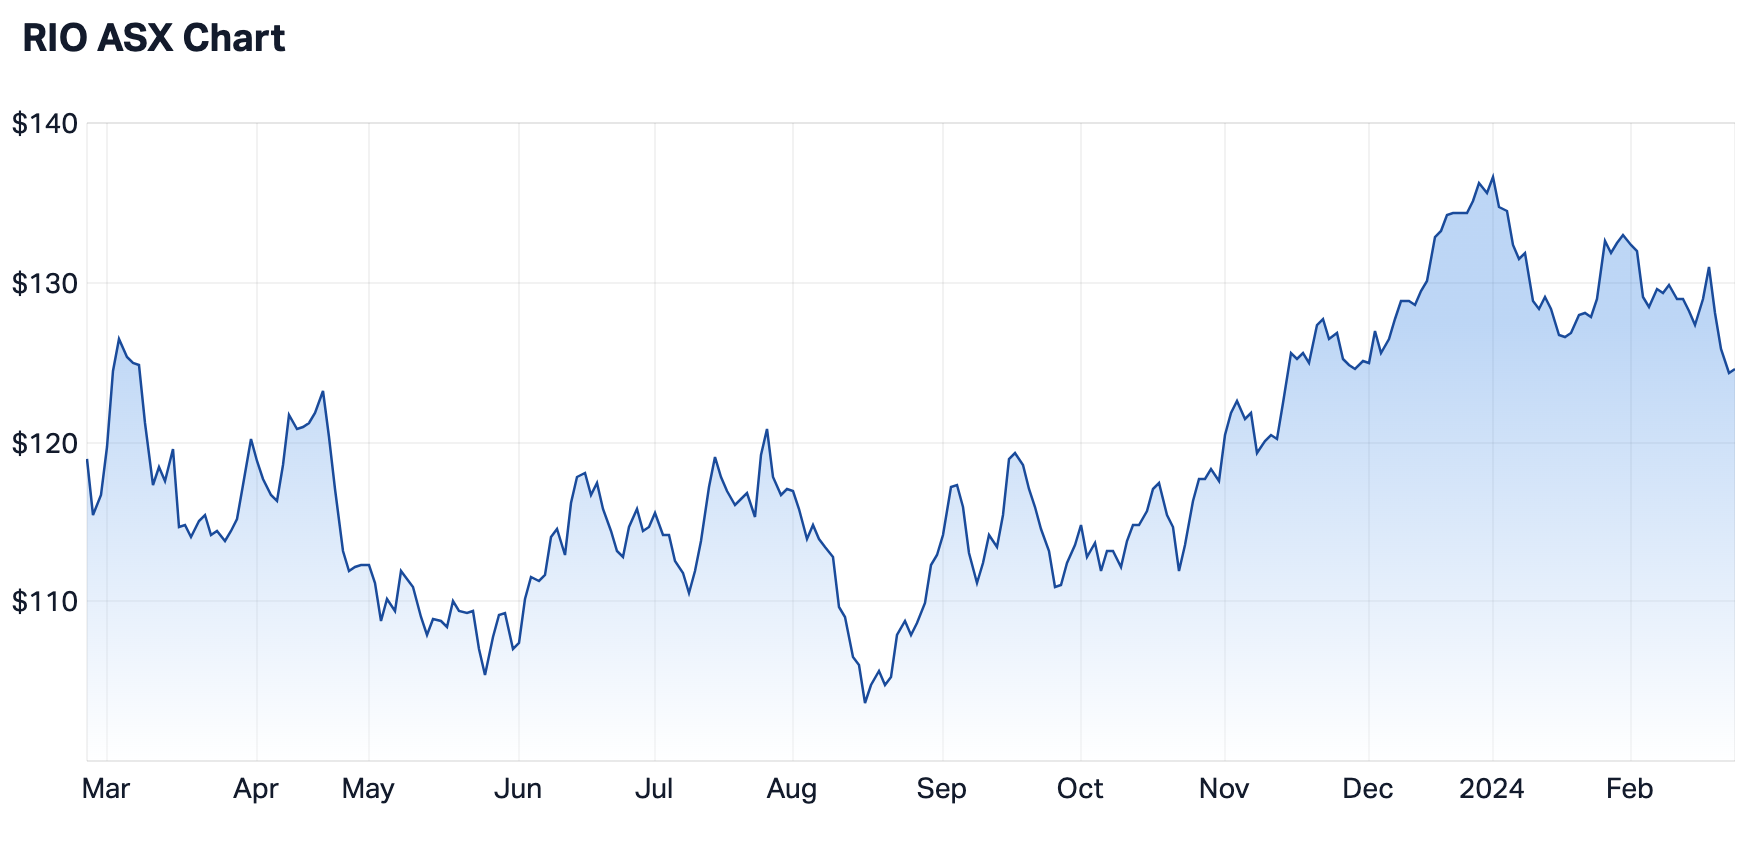 Rio Tinto 12-month price chart (Source: Market Index)